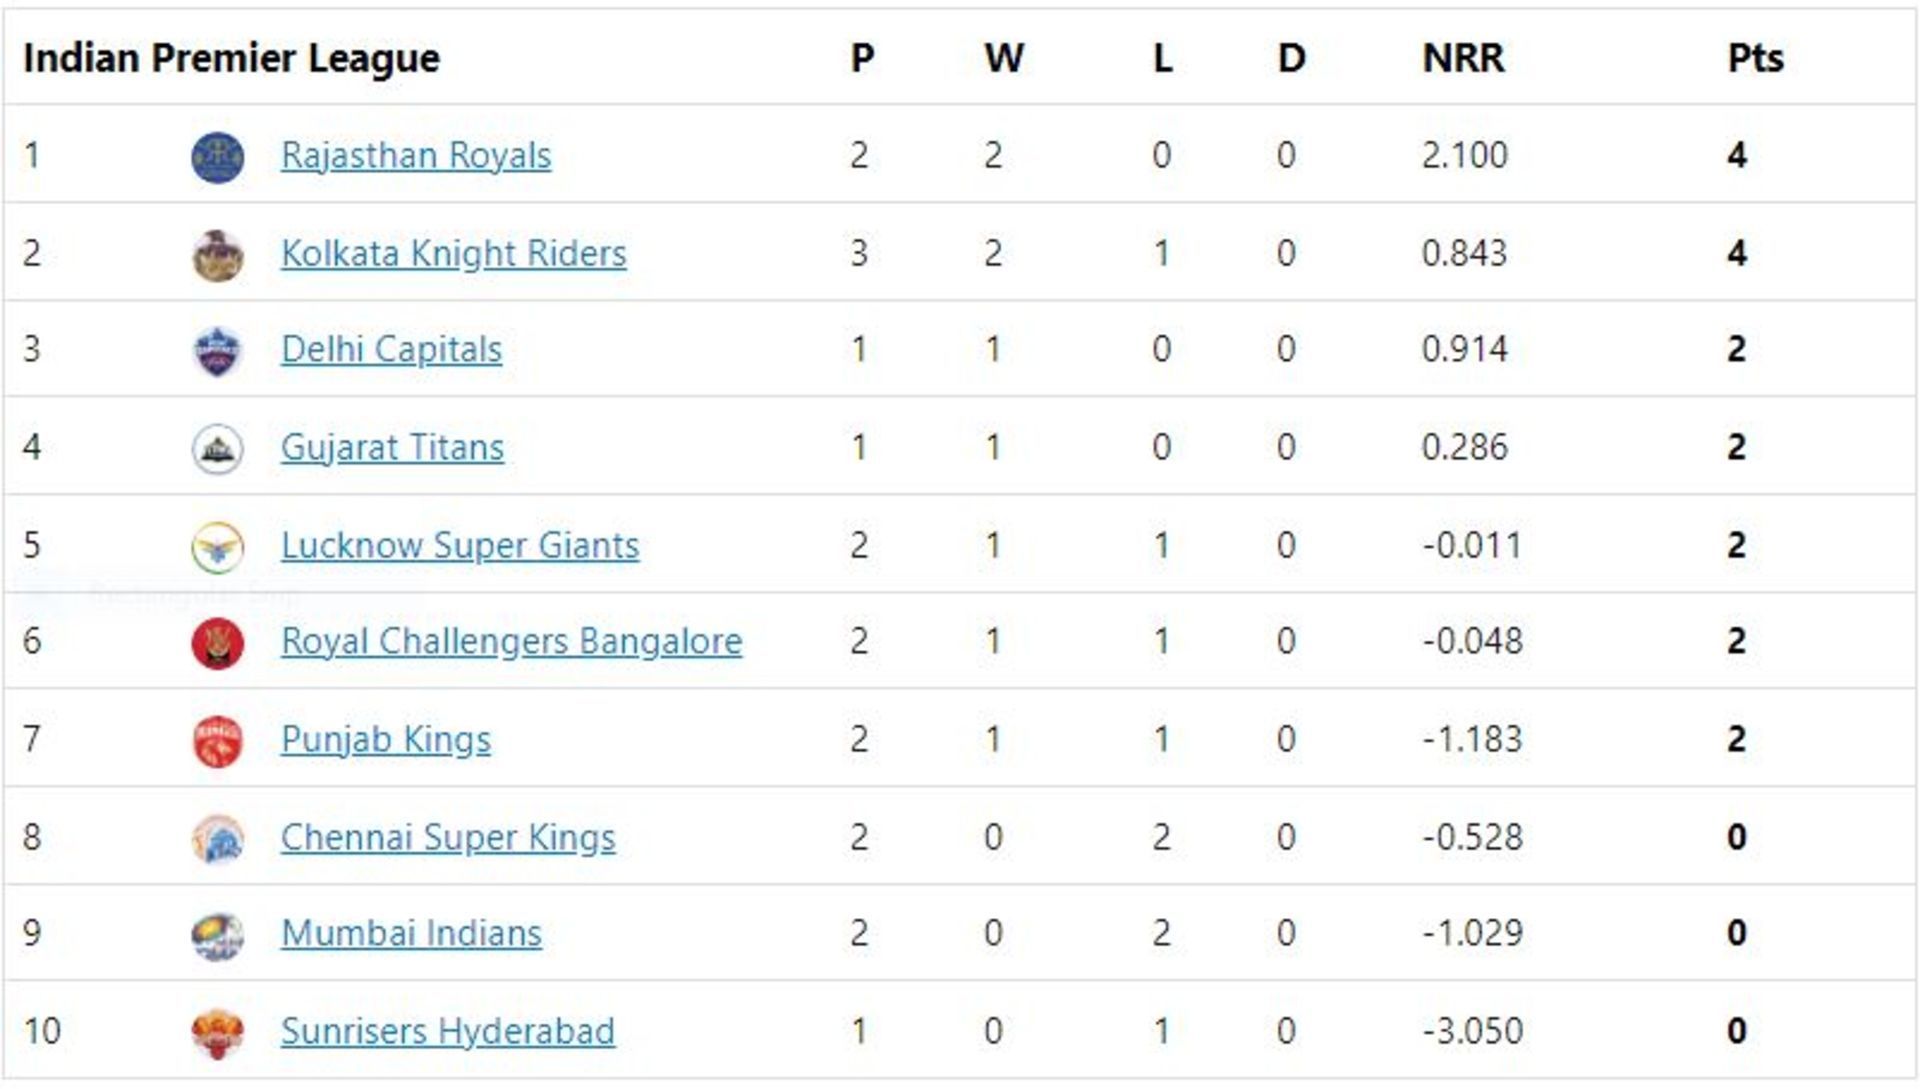 RR move to the top of the points table.